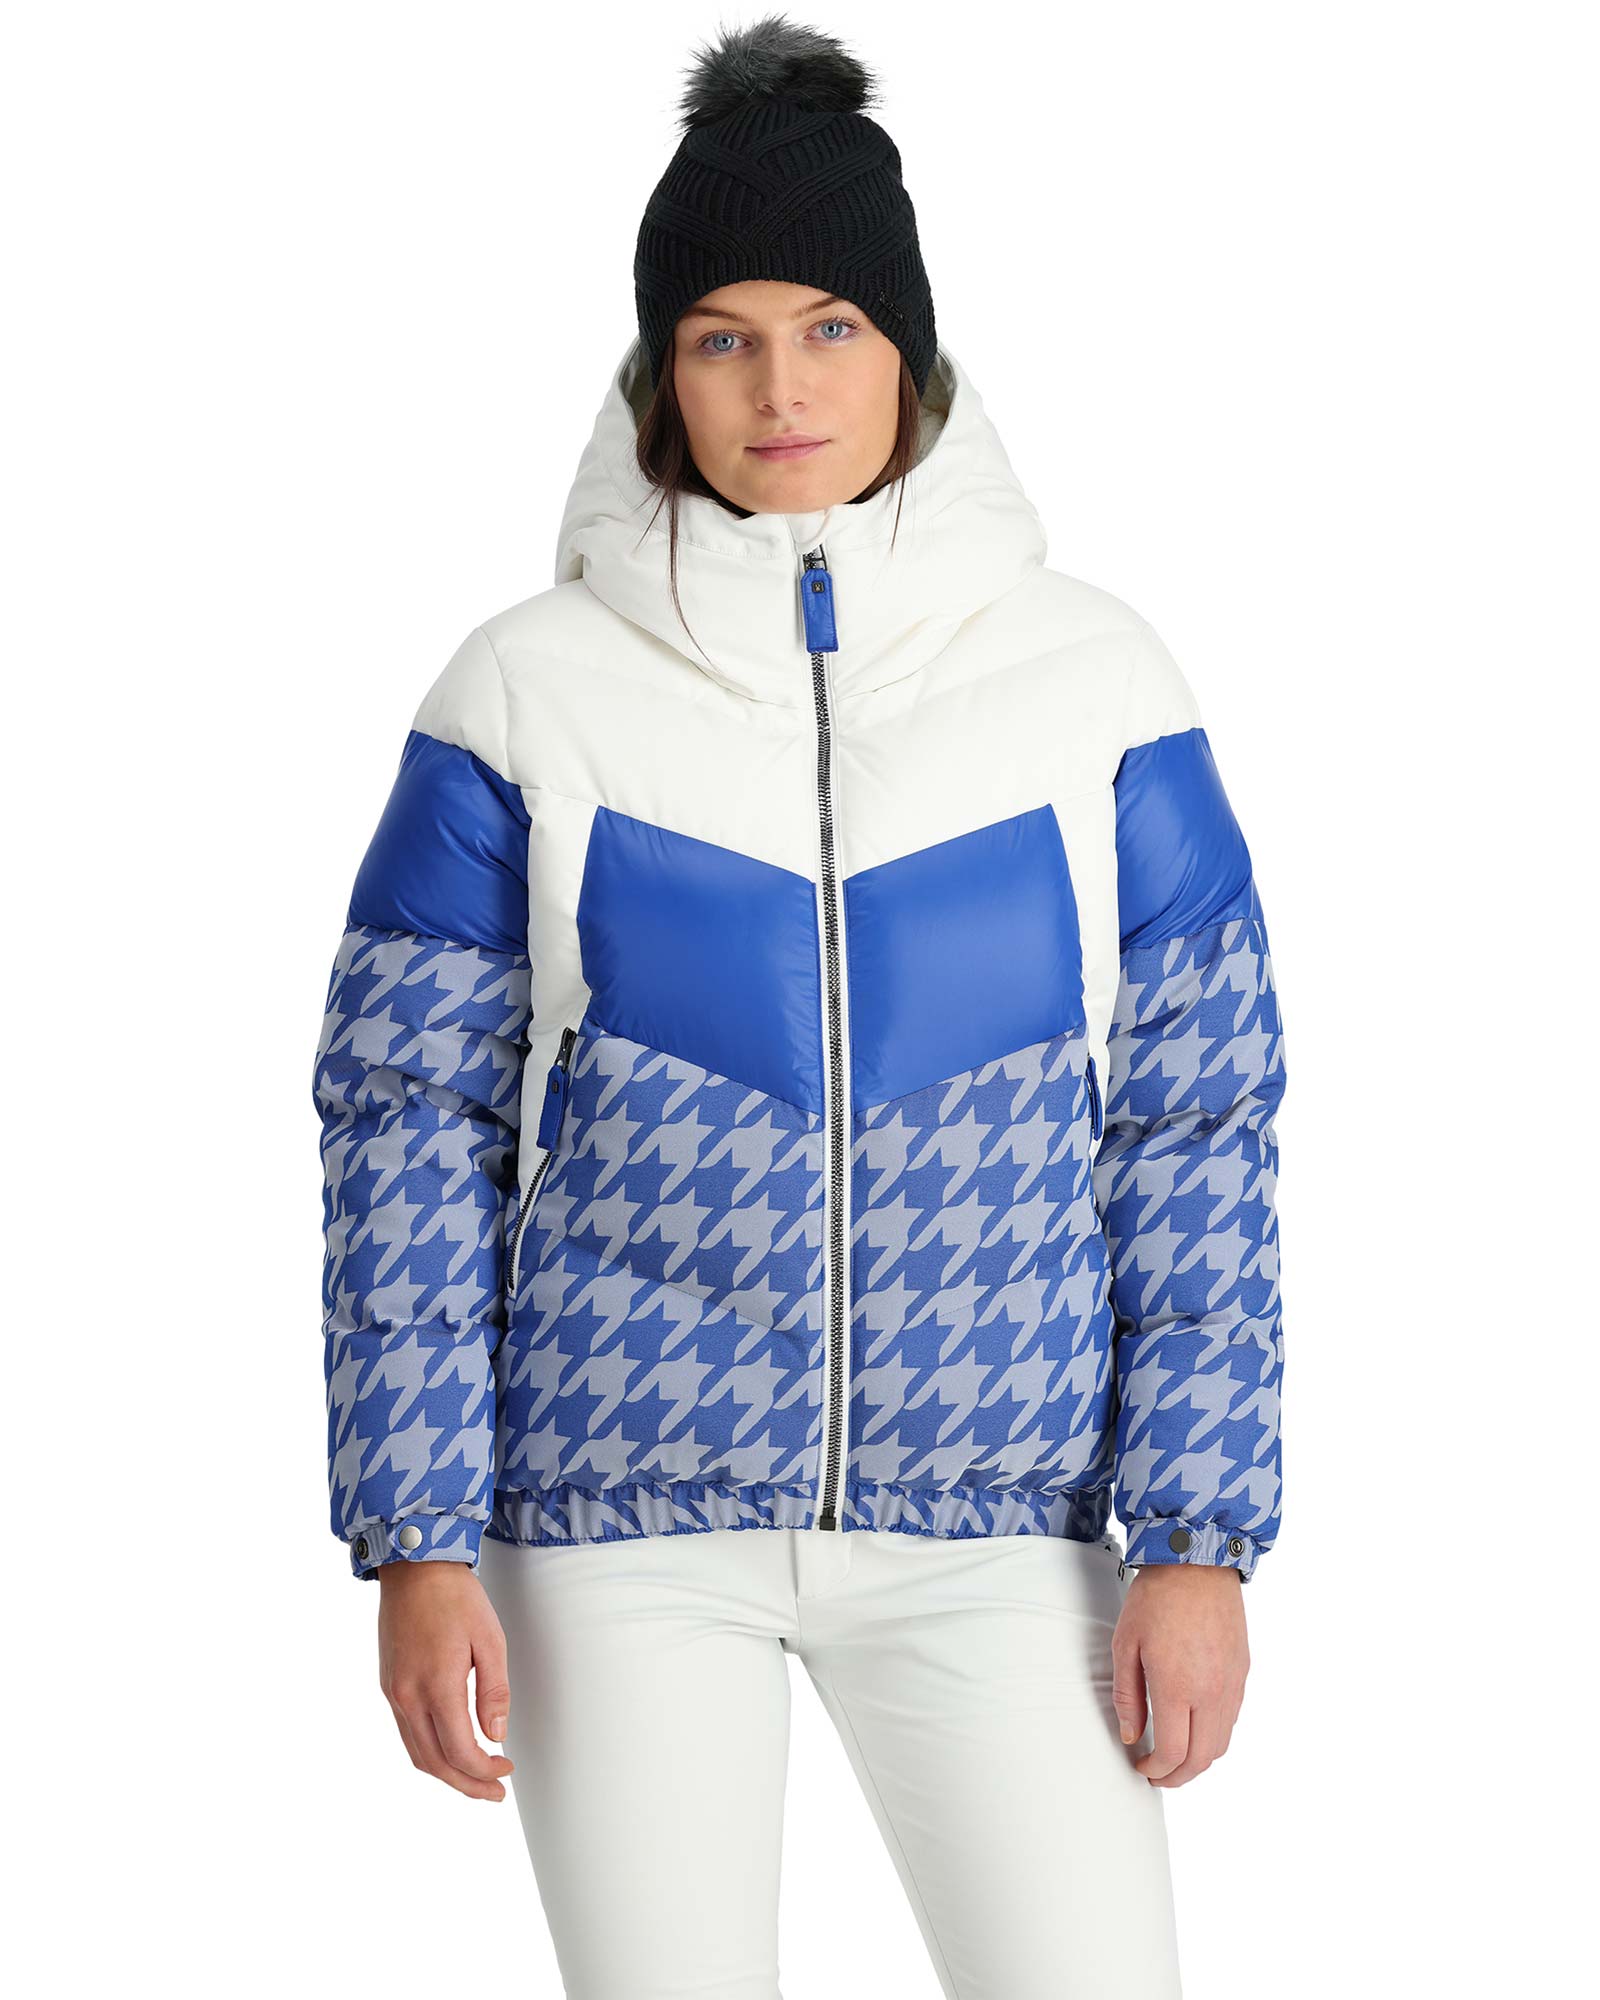 Spyder Women’s Eastwood Down Jacket - Electric Blue Houndstooth Print XS